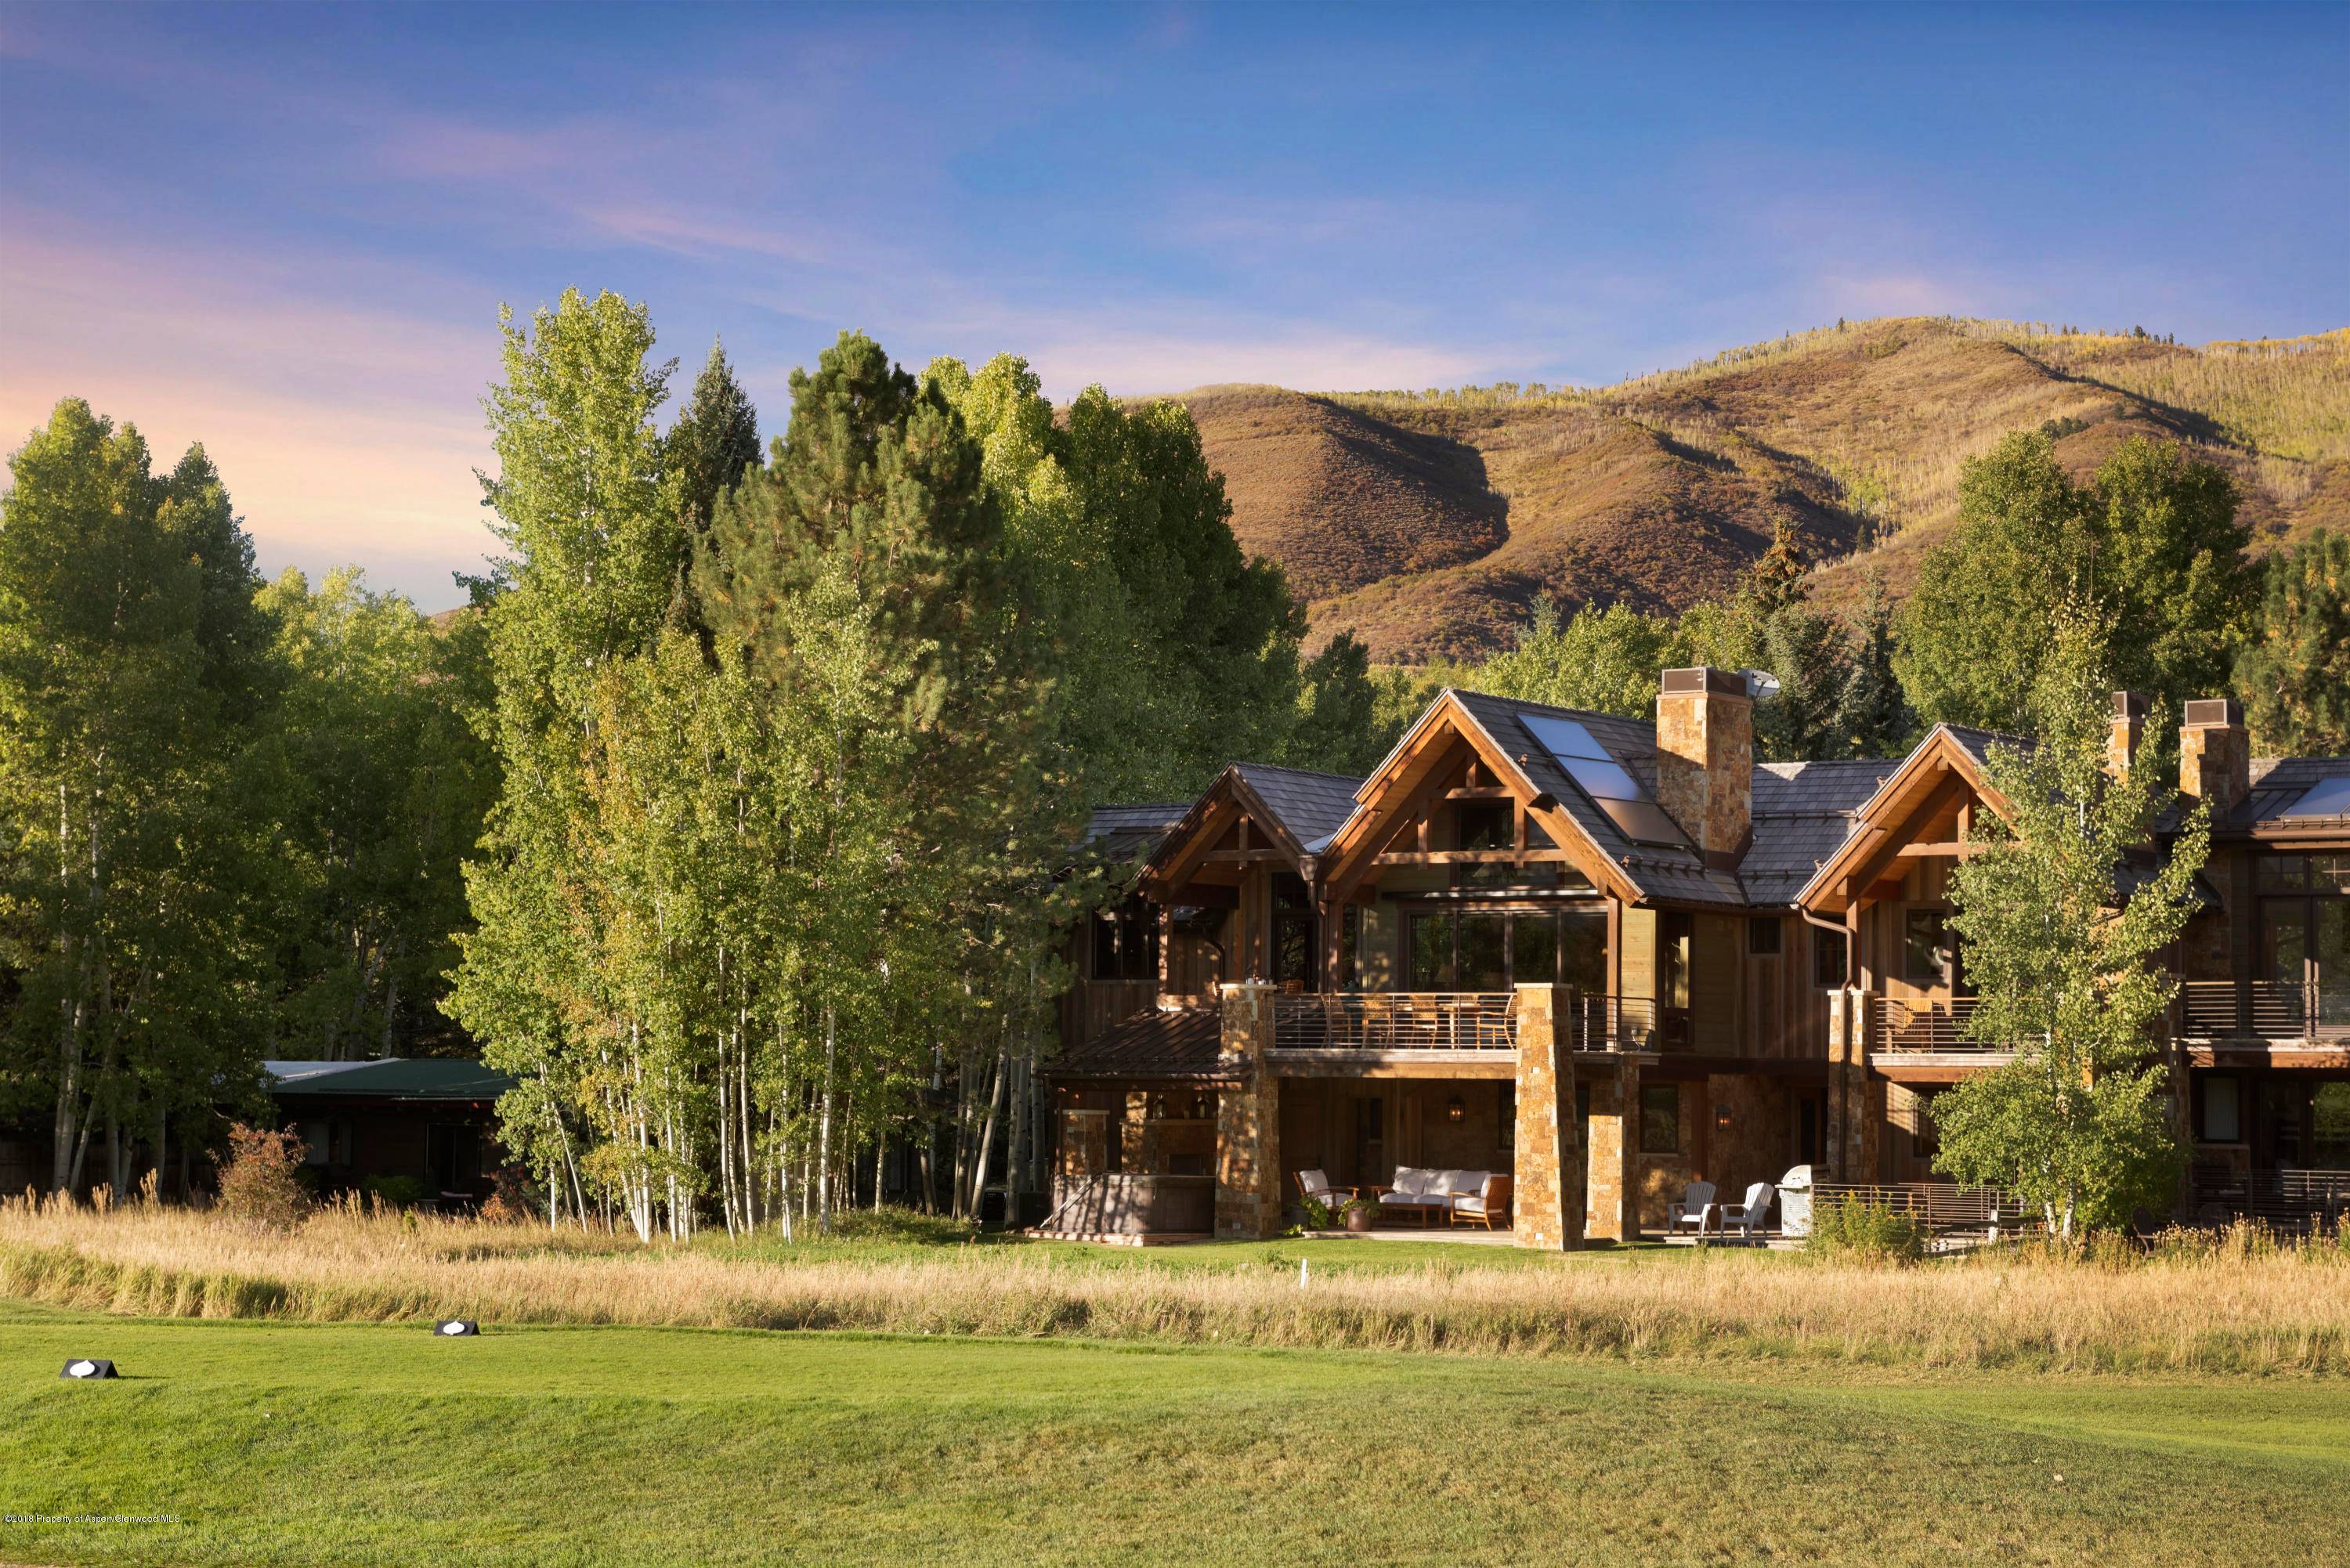 This gorgeous mountain home, located on the Aspen Championship Golf Course, offers unparalleled views of Pyramid Peak, Aspen Highlands, Buttermilk, and Independence Pass.